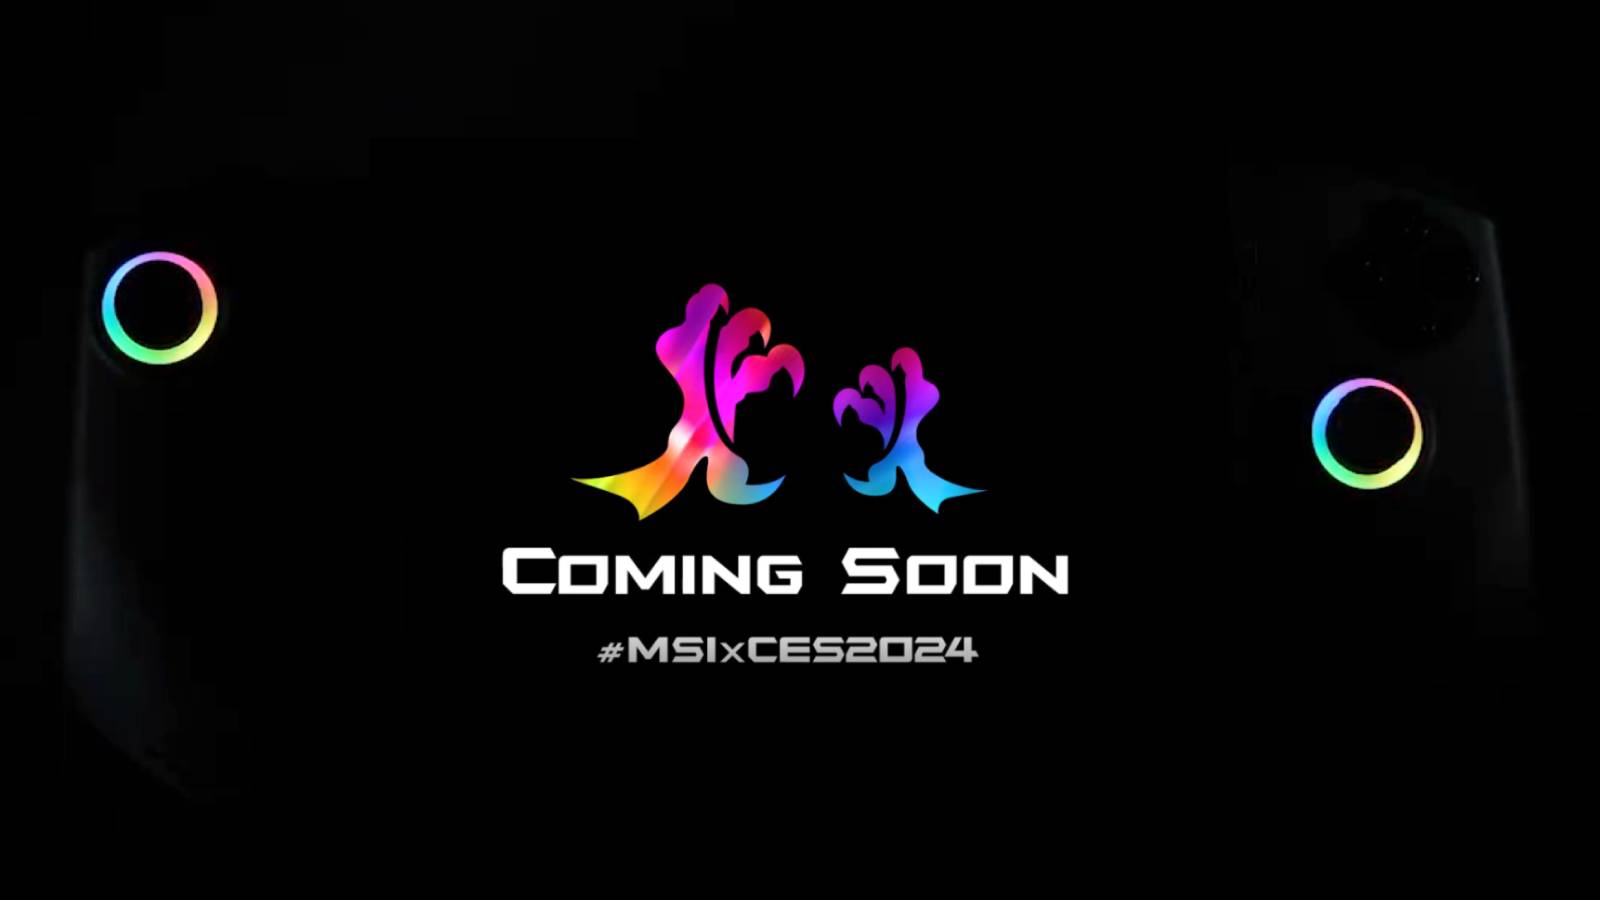 Image of the teaser MSI graphic for its upcoming handheld, on the screen of its handheld, for CES 2024.